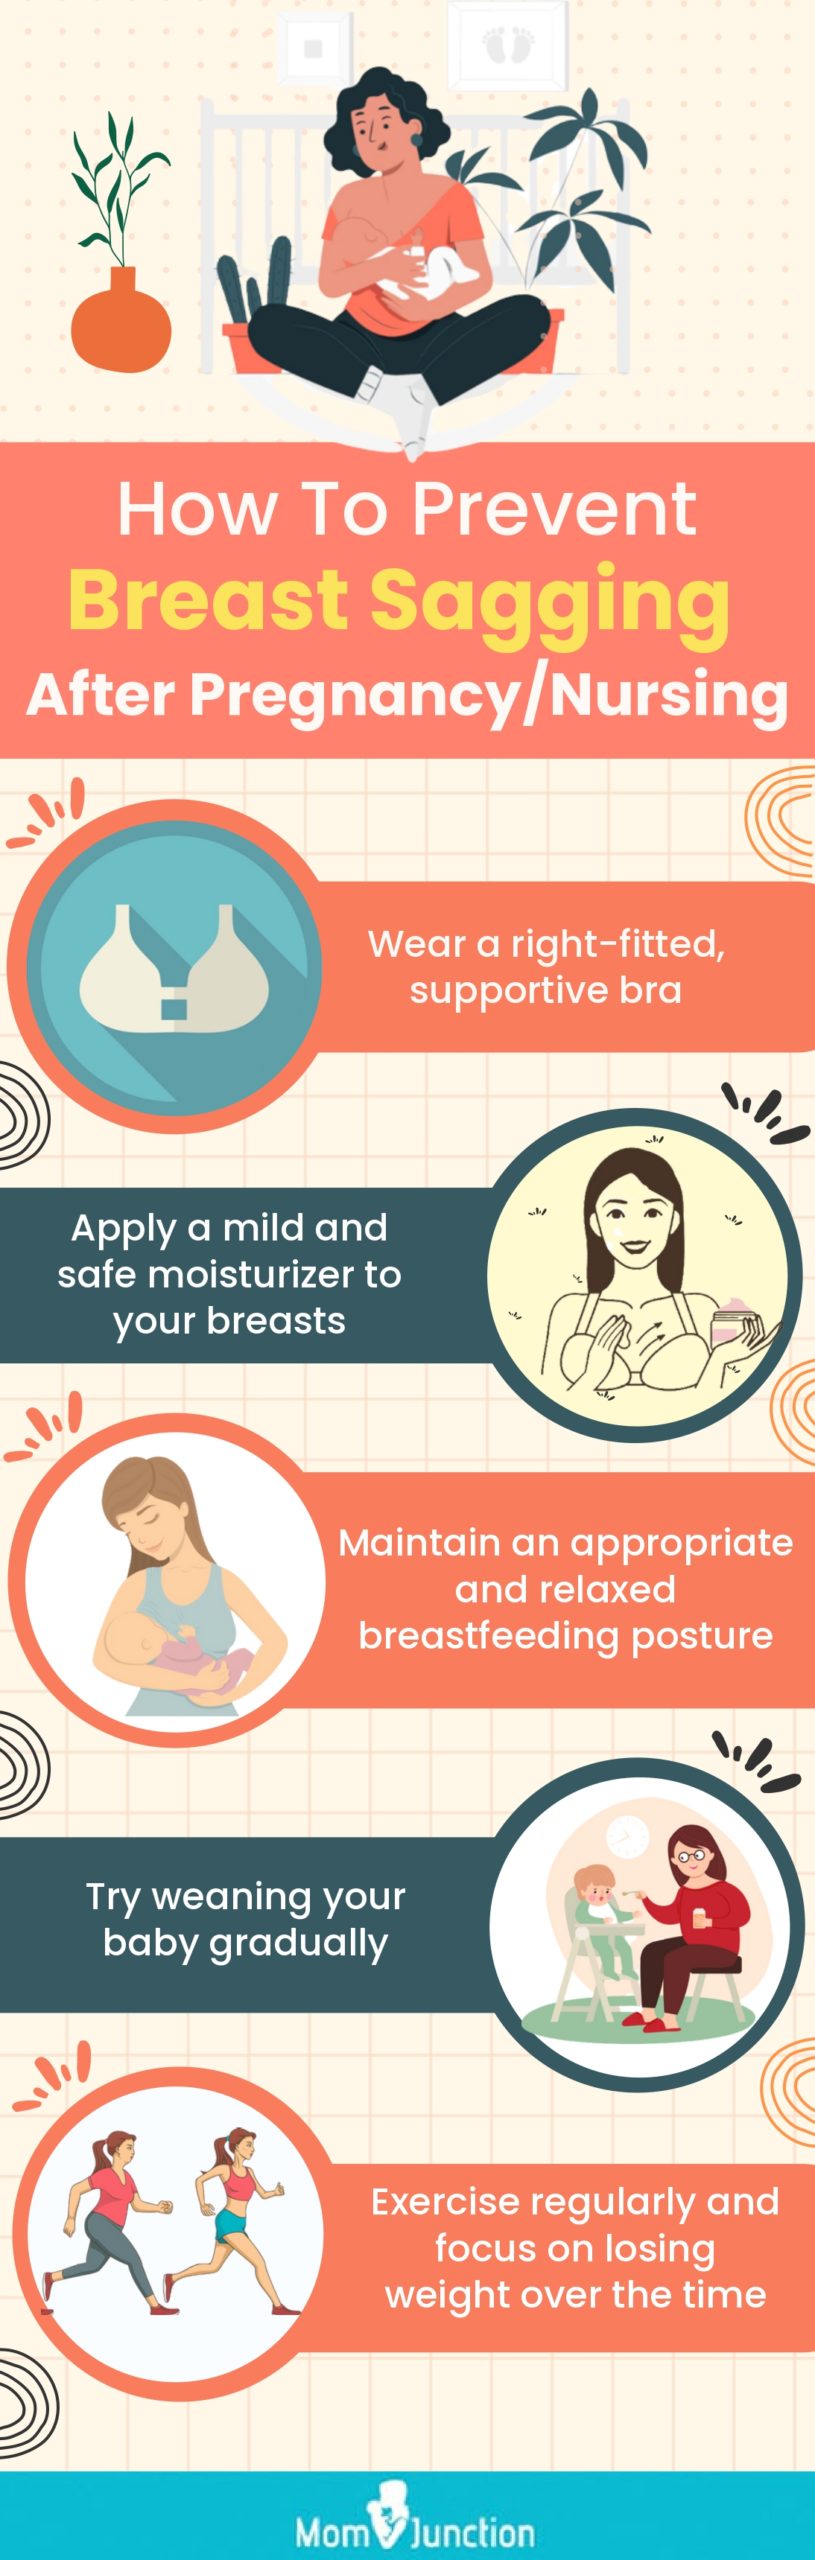 Saggy Breasts: Weight Loss, Exercises, and Breastfeeding